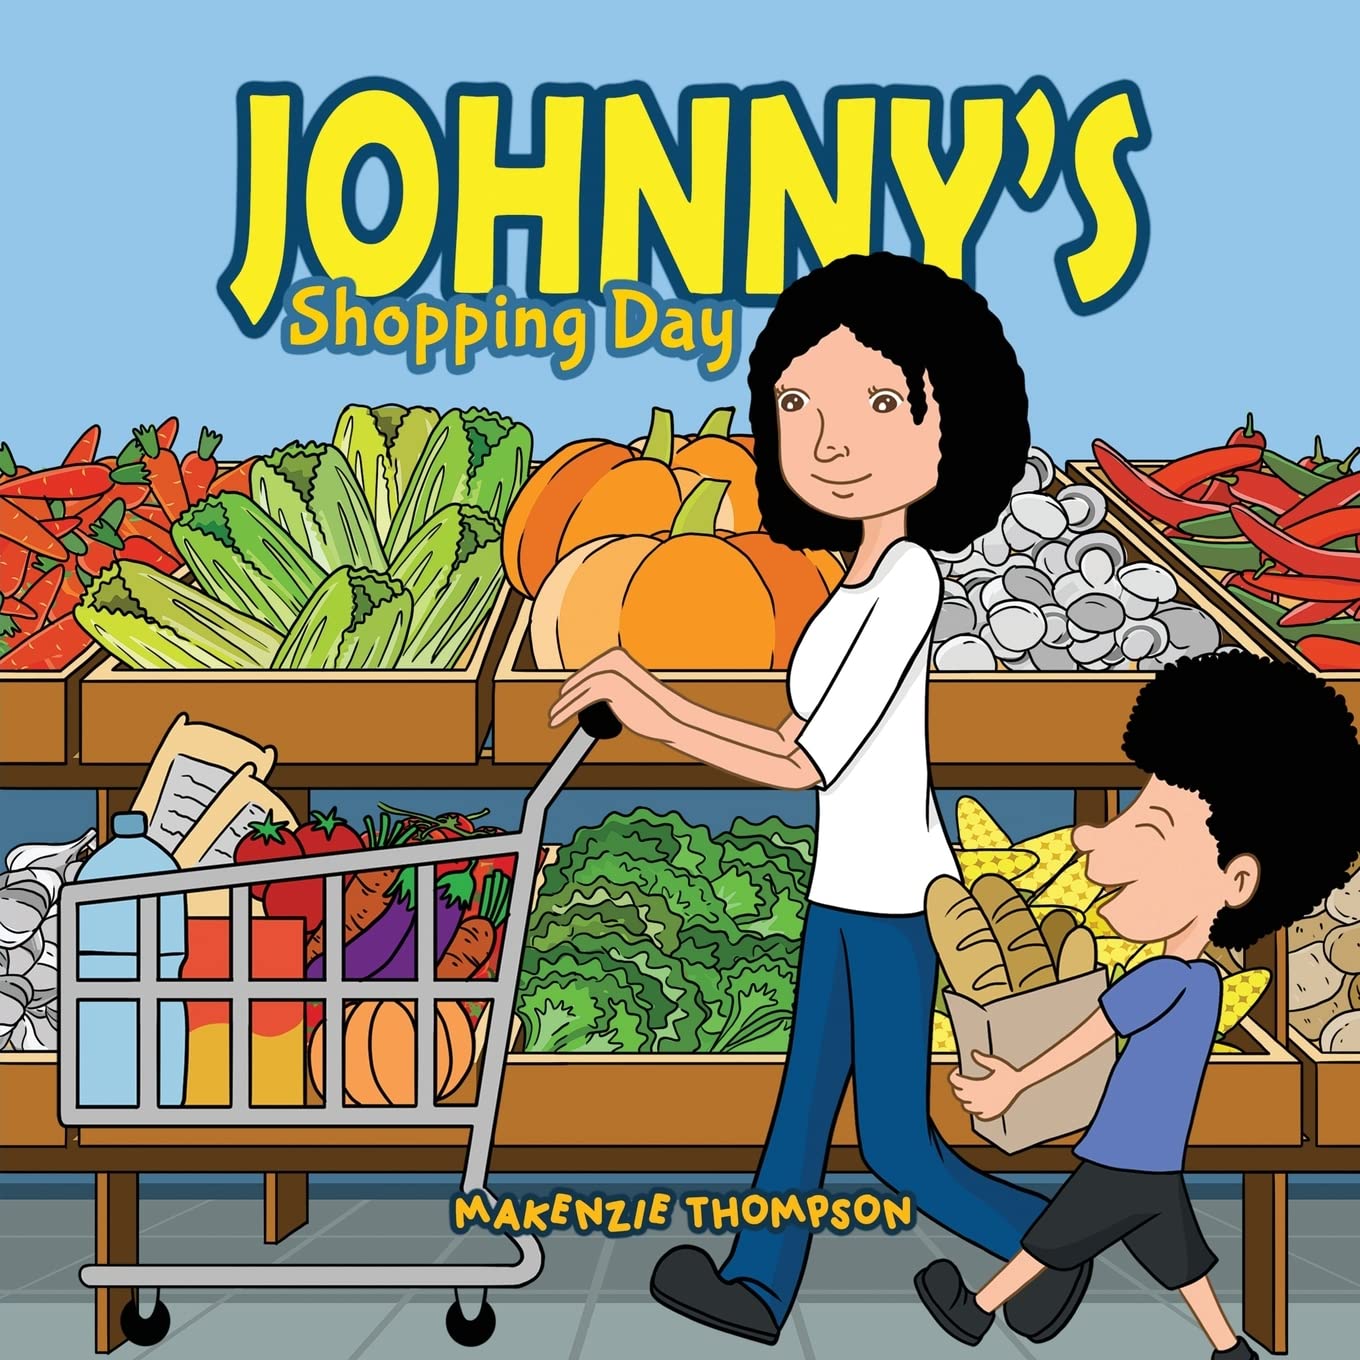 Author's Tranquility Press Introduces New Children's Book 'Johnny's Shopping Day' - A Heartwarming Story of Adventure and Personal Growth